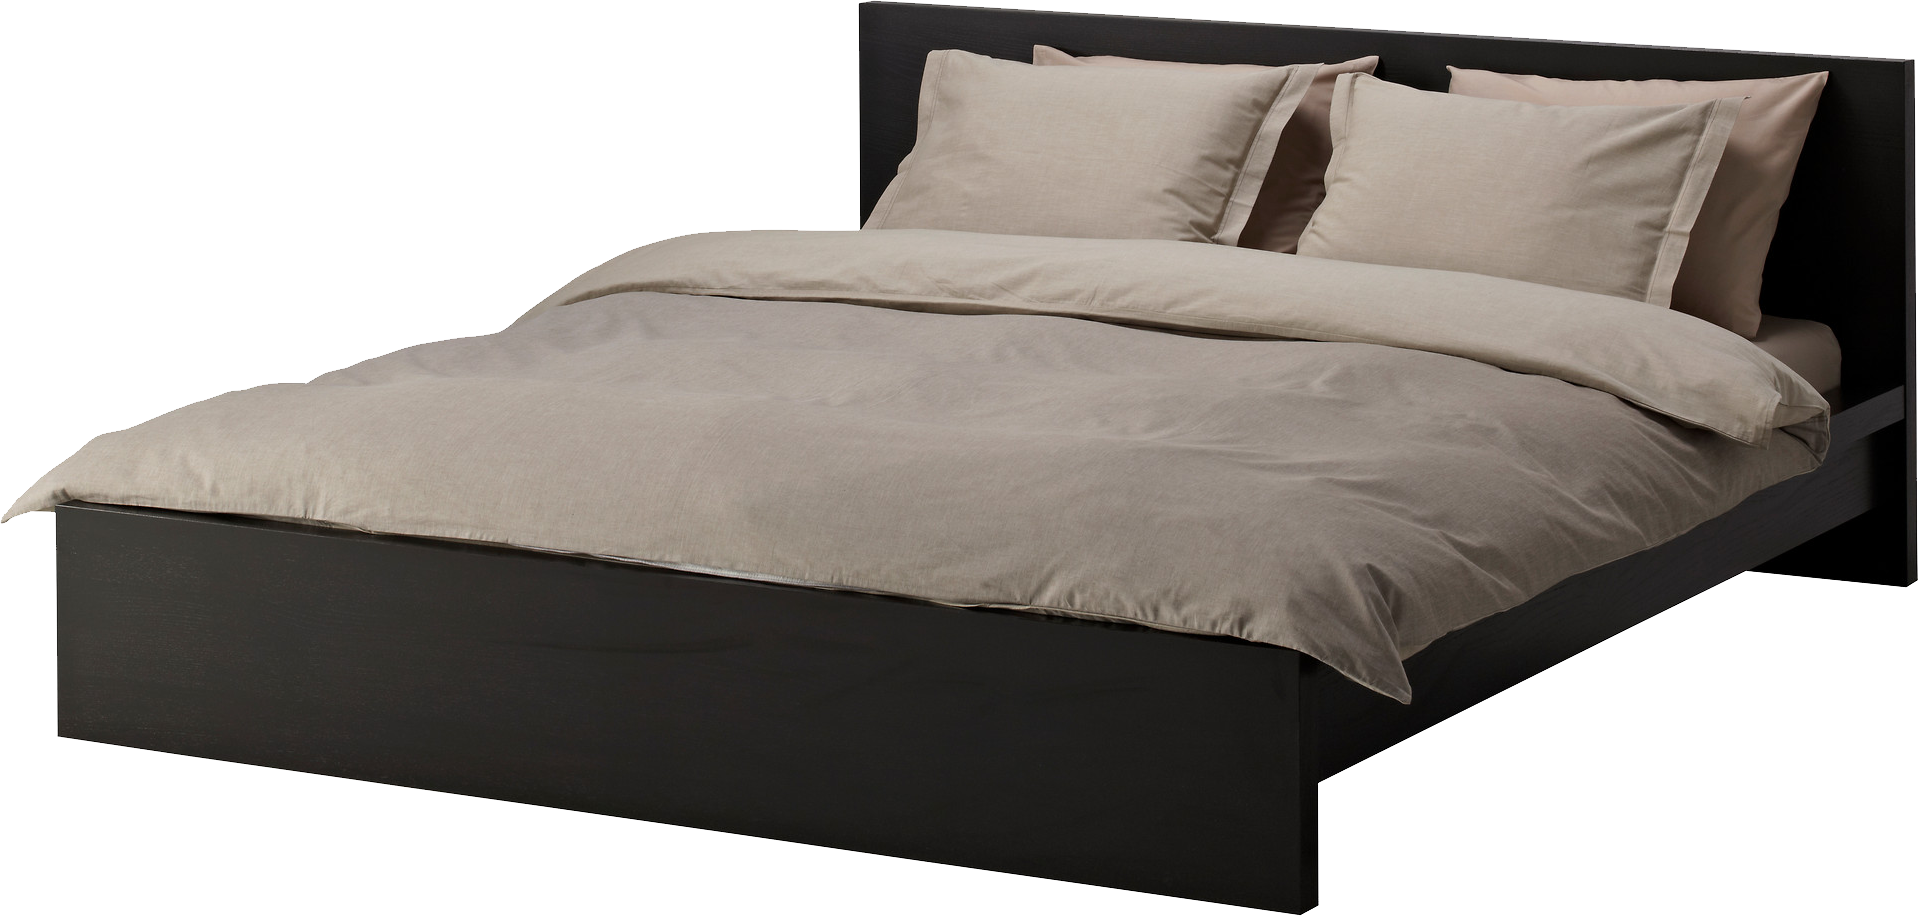 Bed PNG Free Image